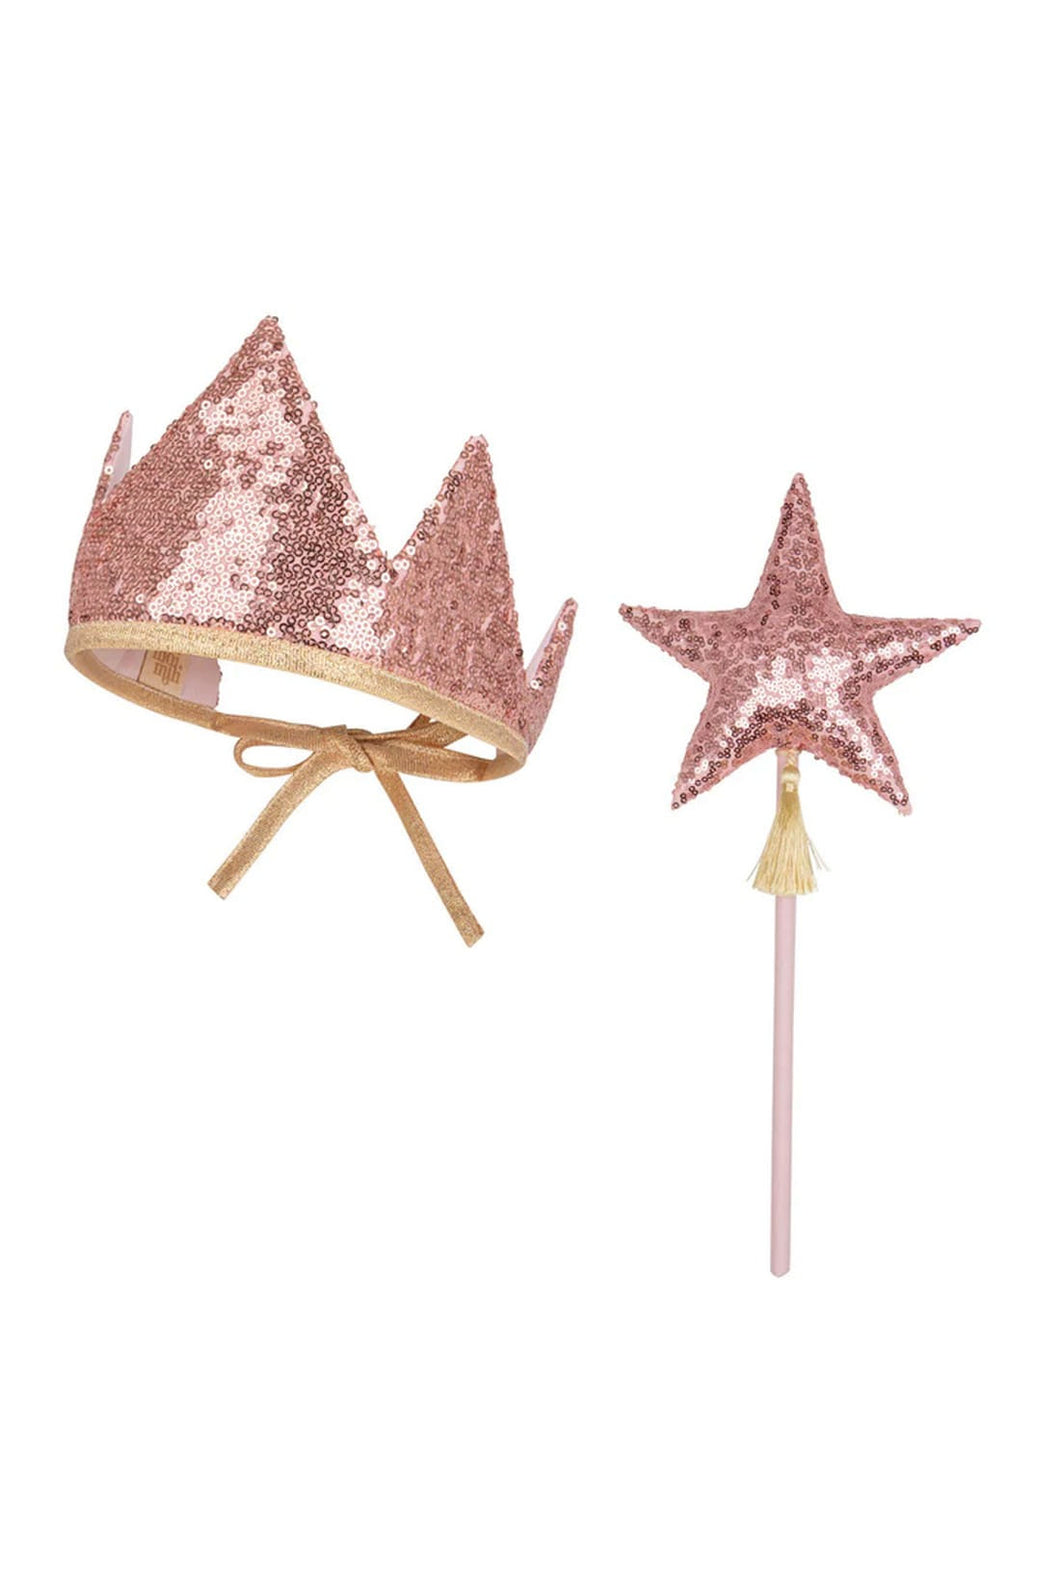 Moi Mili Pink Sequins Crown and Wand Magic Set 4